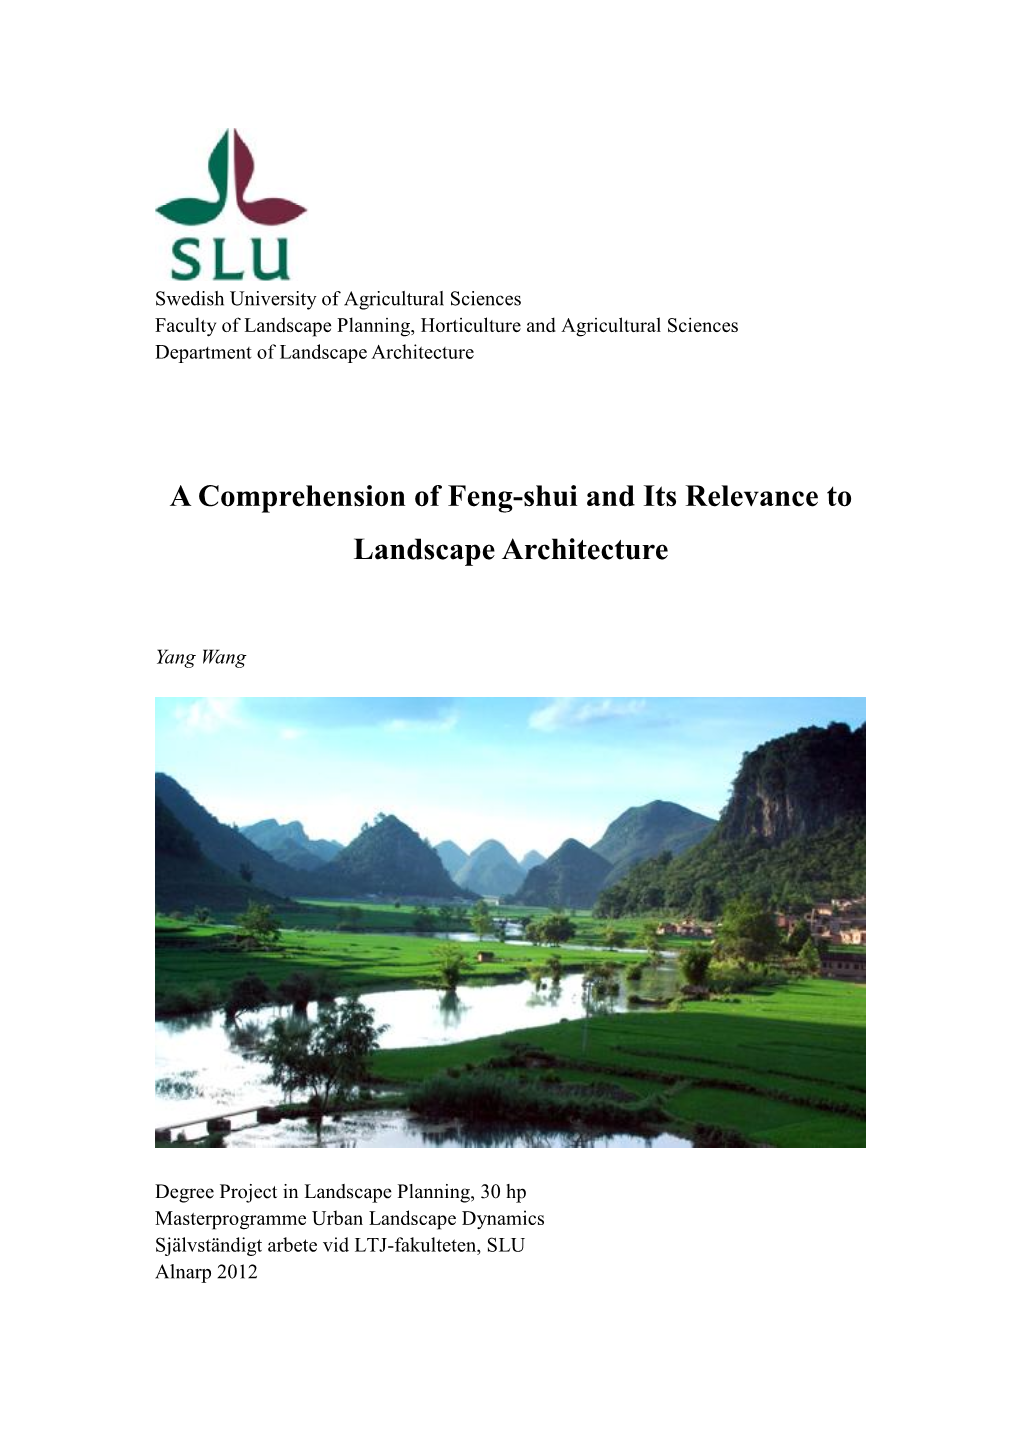 A Comprehension of Feng-Shui and Its Relevance to Land Scape